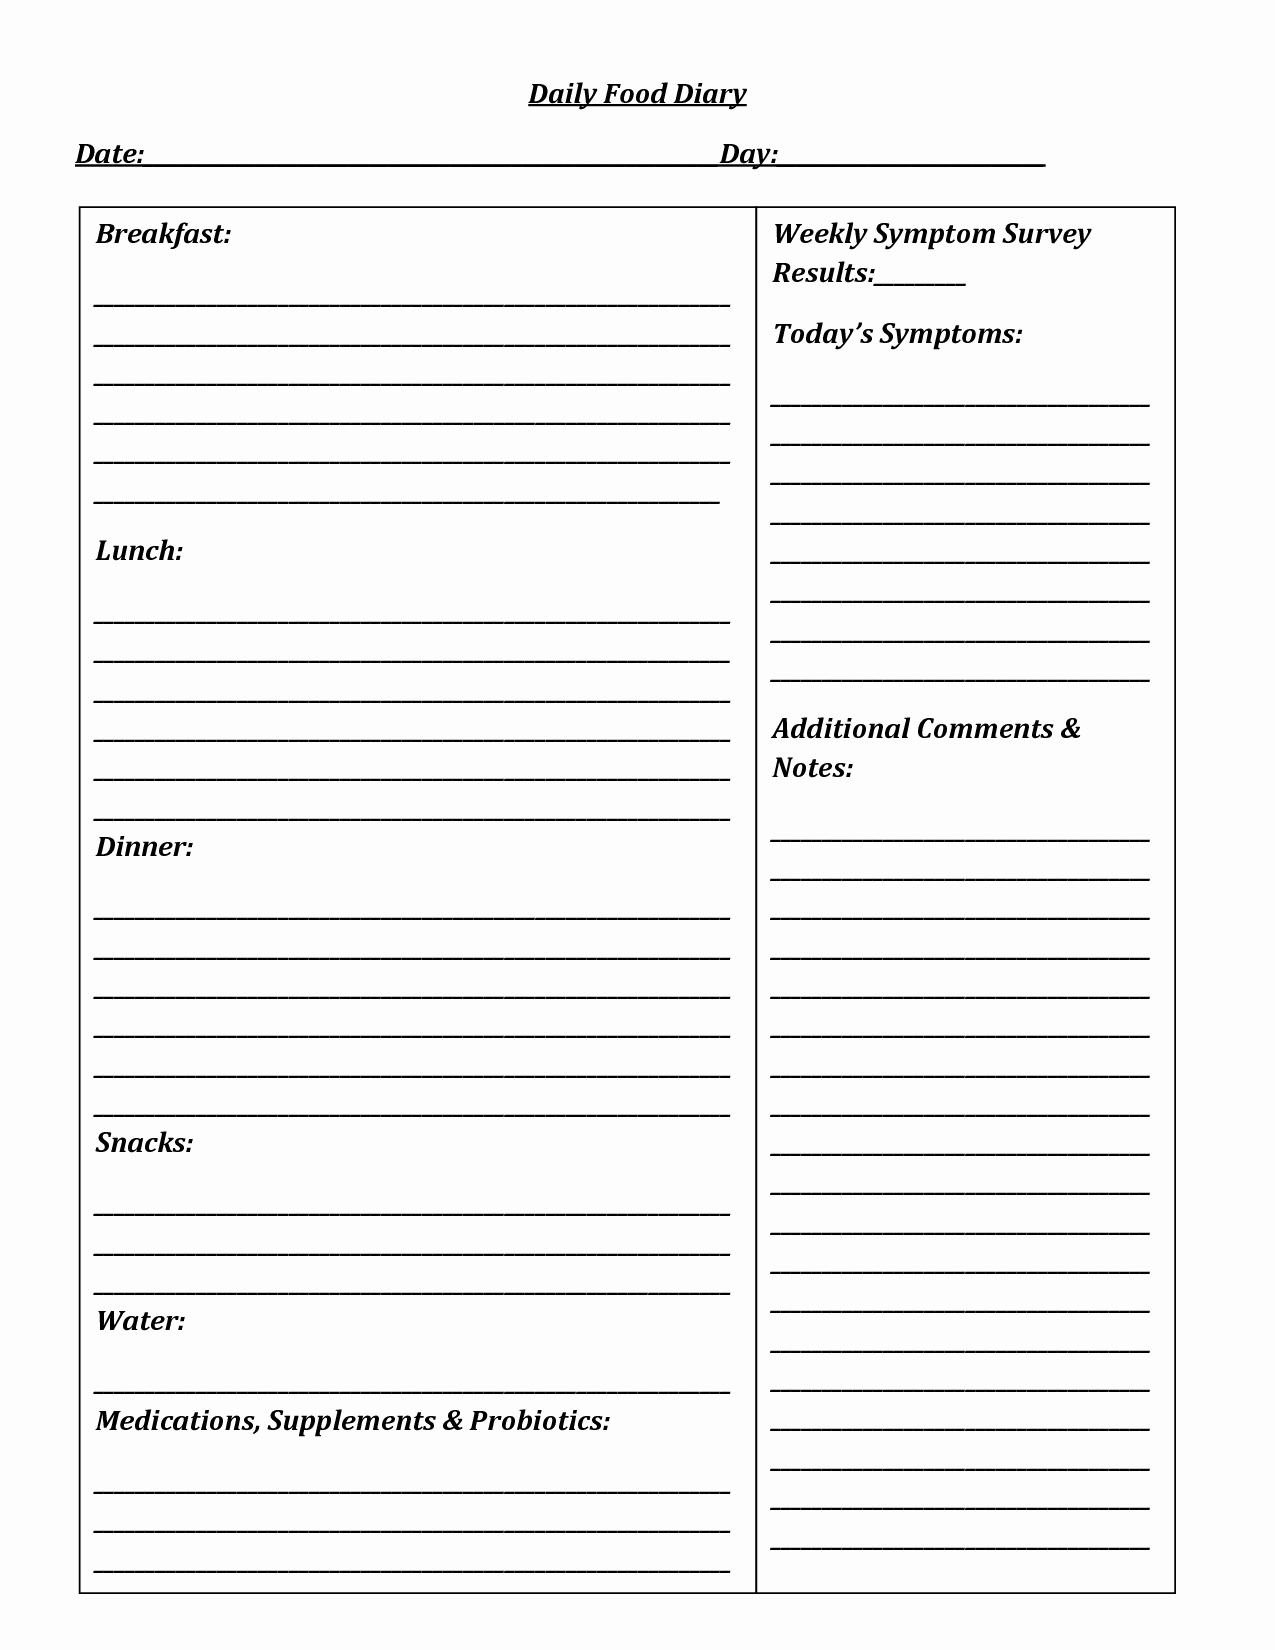 Daily Food Log New Pin On Free Printables Digitals Meal Planners Etc